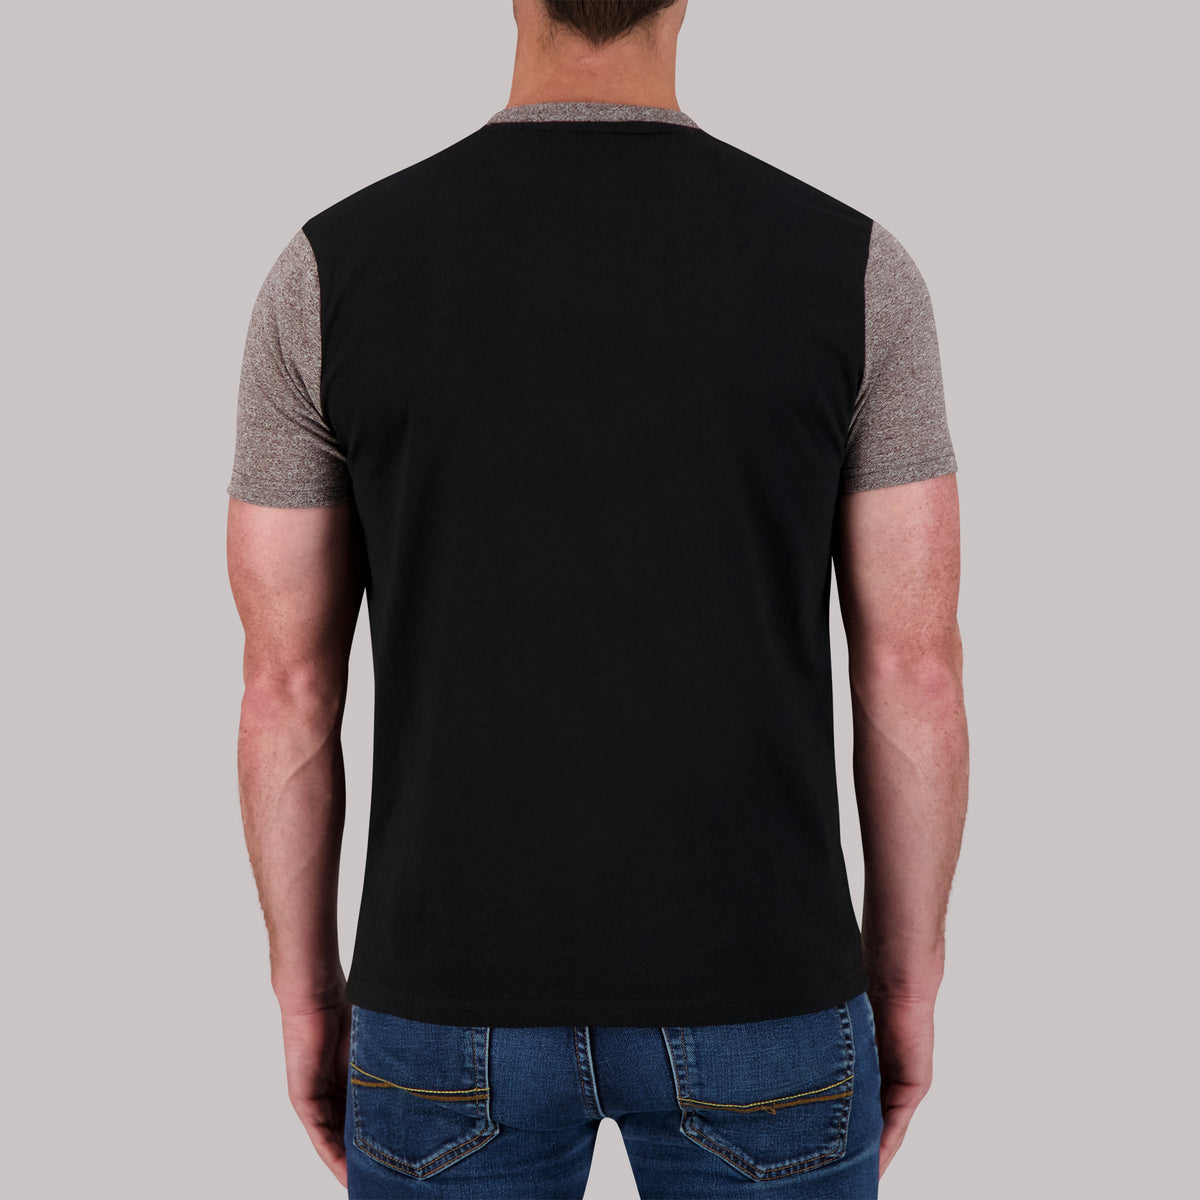 Short Sleeve Cotton/Poly Henley with pocket Grindal Knit in Truffle